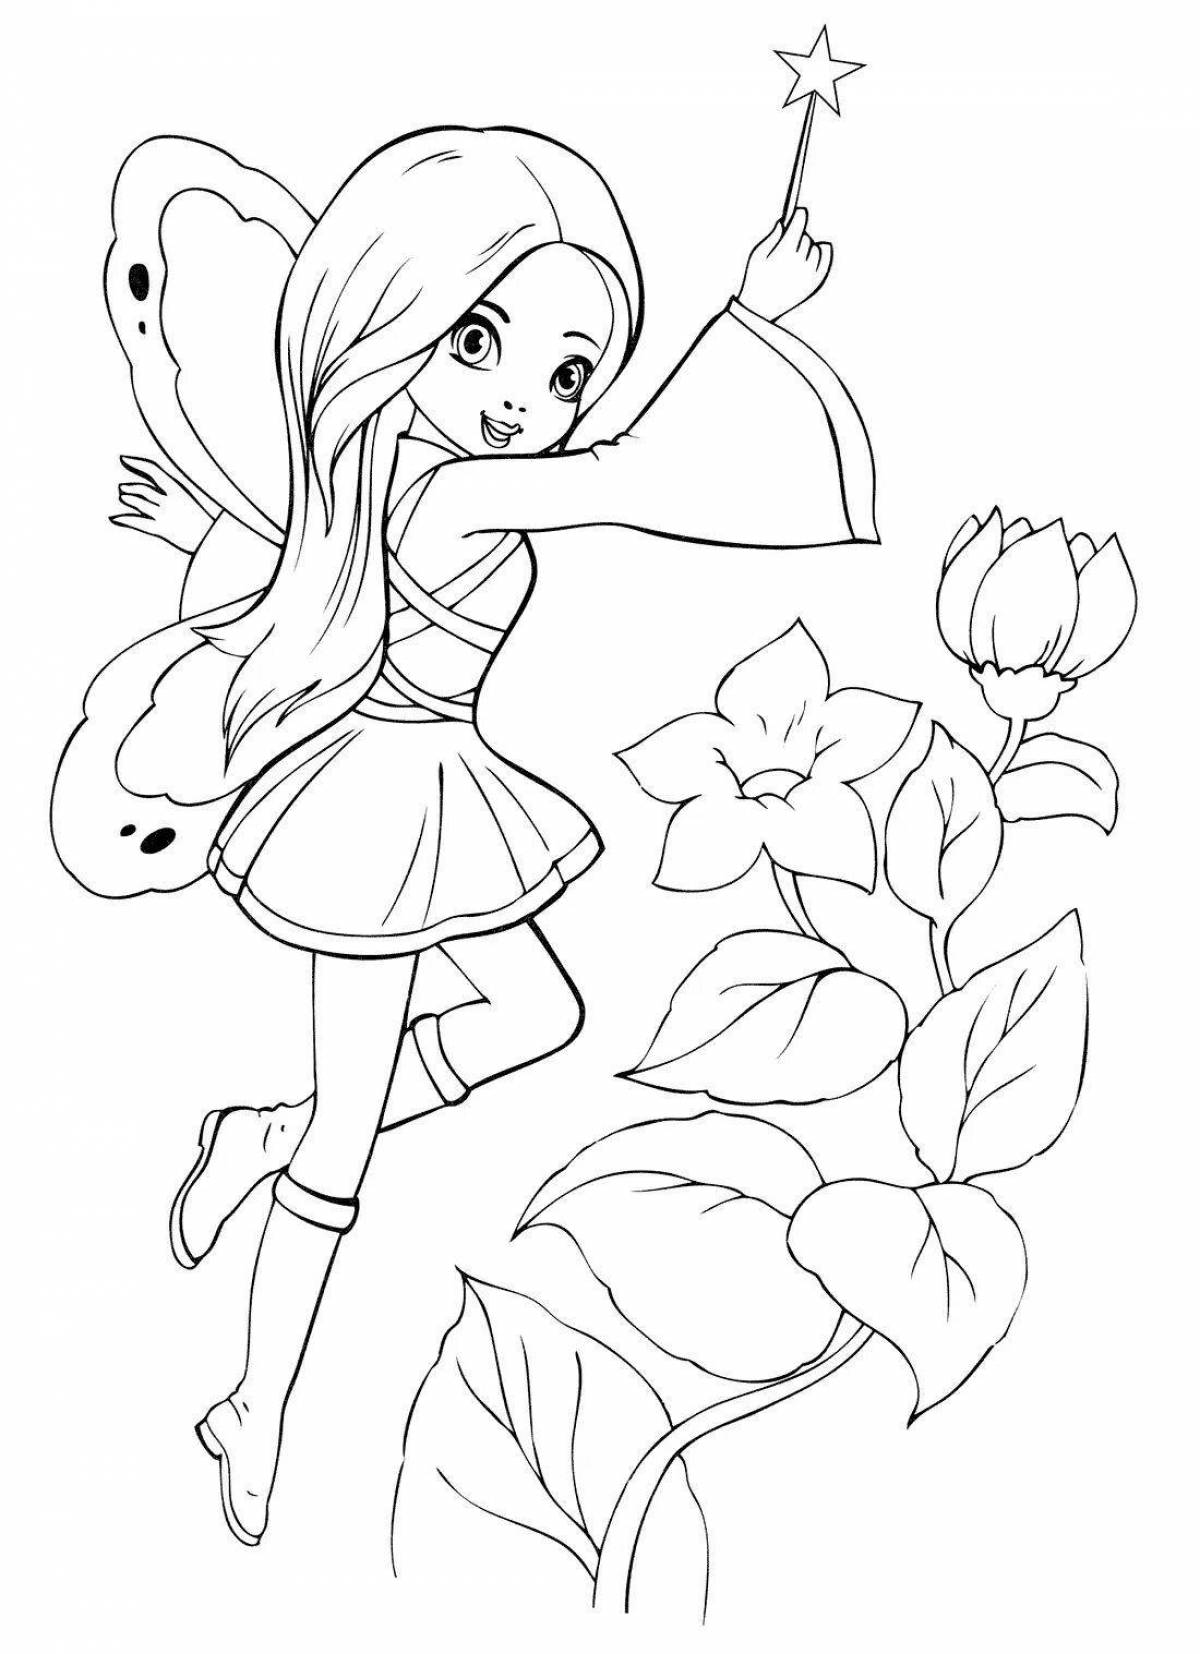 Exuberant coloring page coloring book for girls 6 7 years old